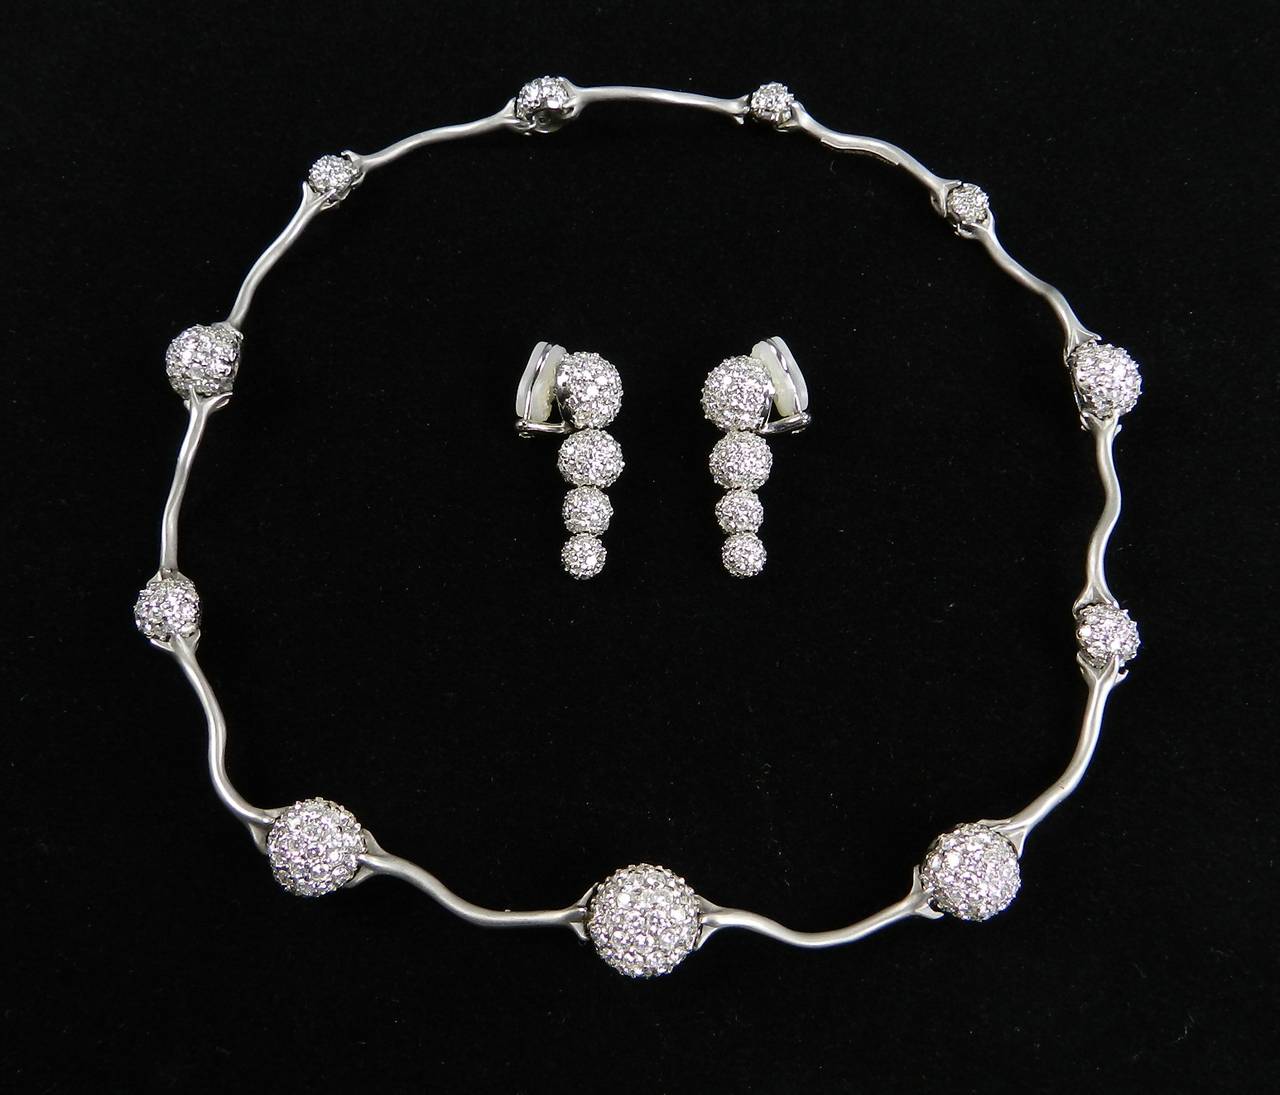 Angela Cummings platinum and diamond necklace and earrings set. She designed jewelry at Tiffany and Co. from 1969 to 1984.  The necklace has brushed matte platinum 